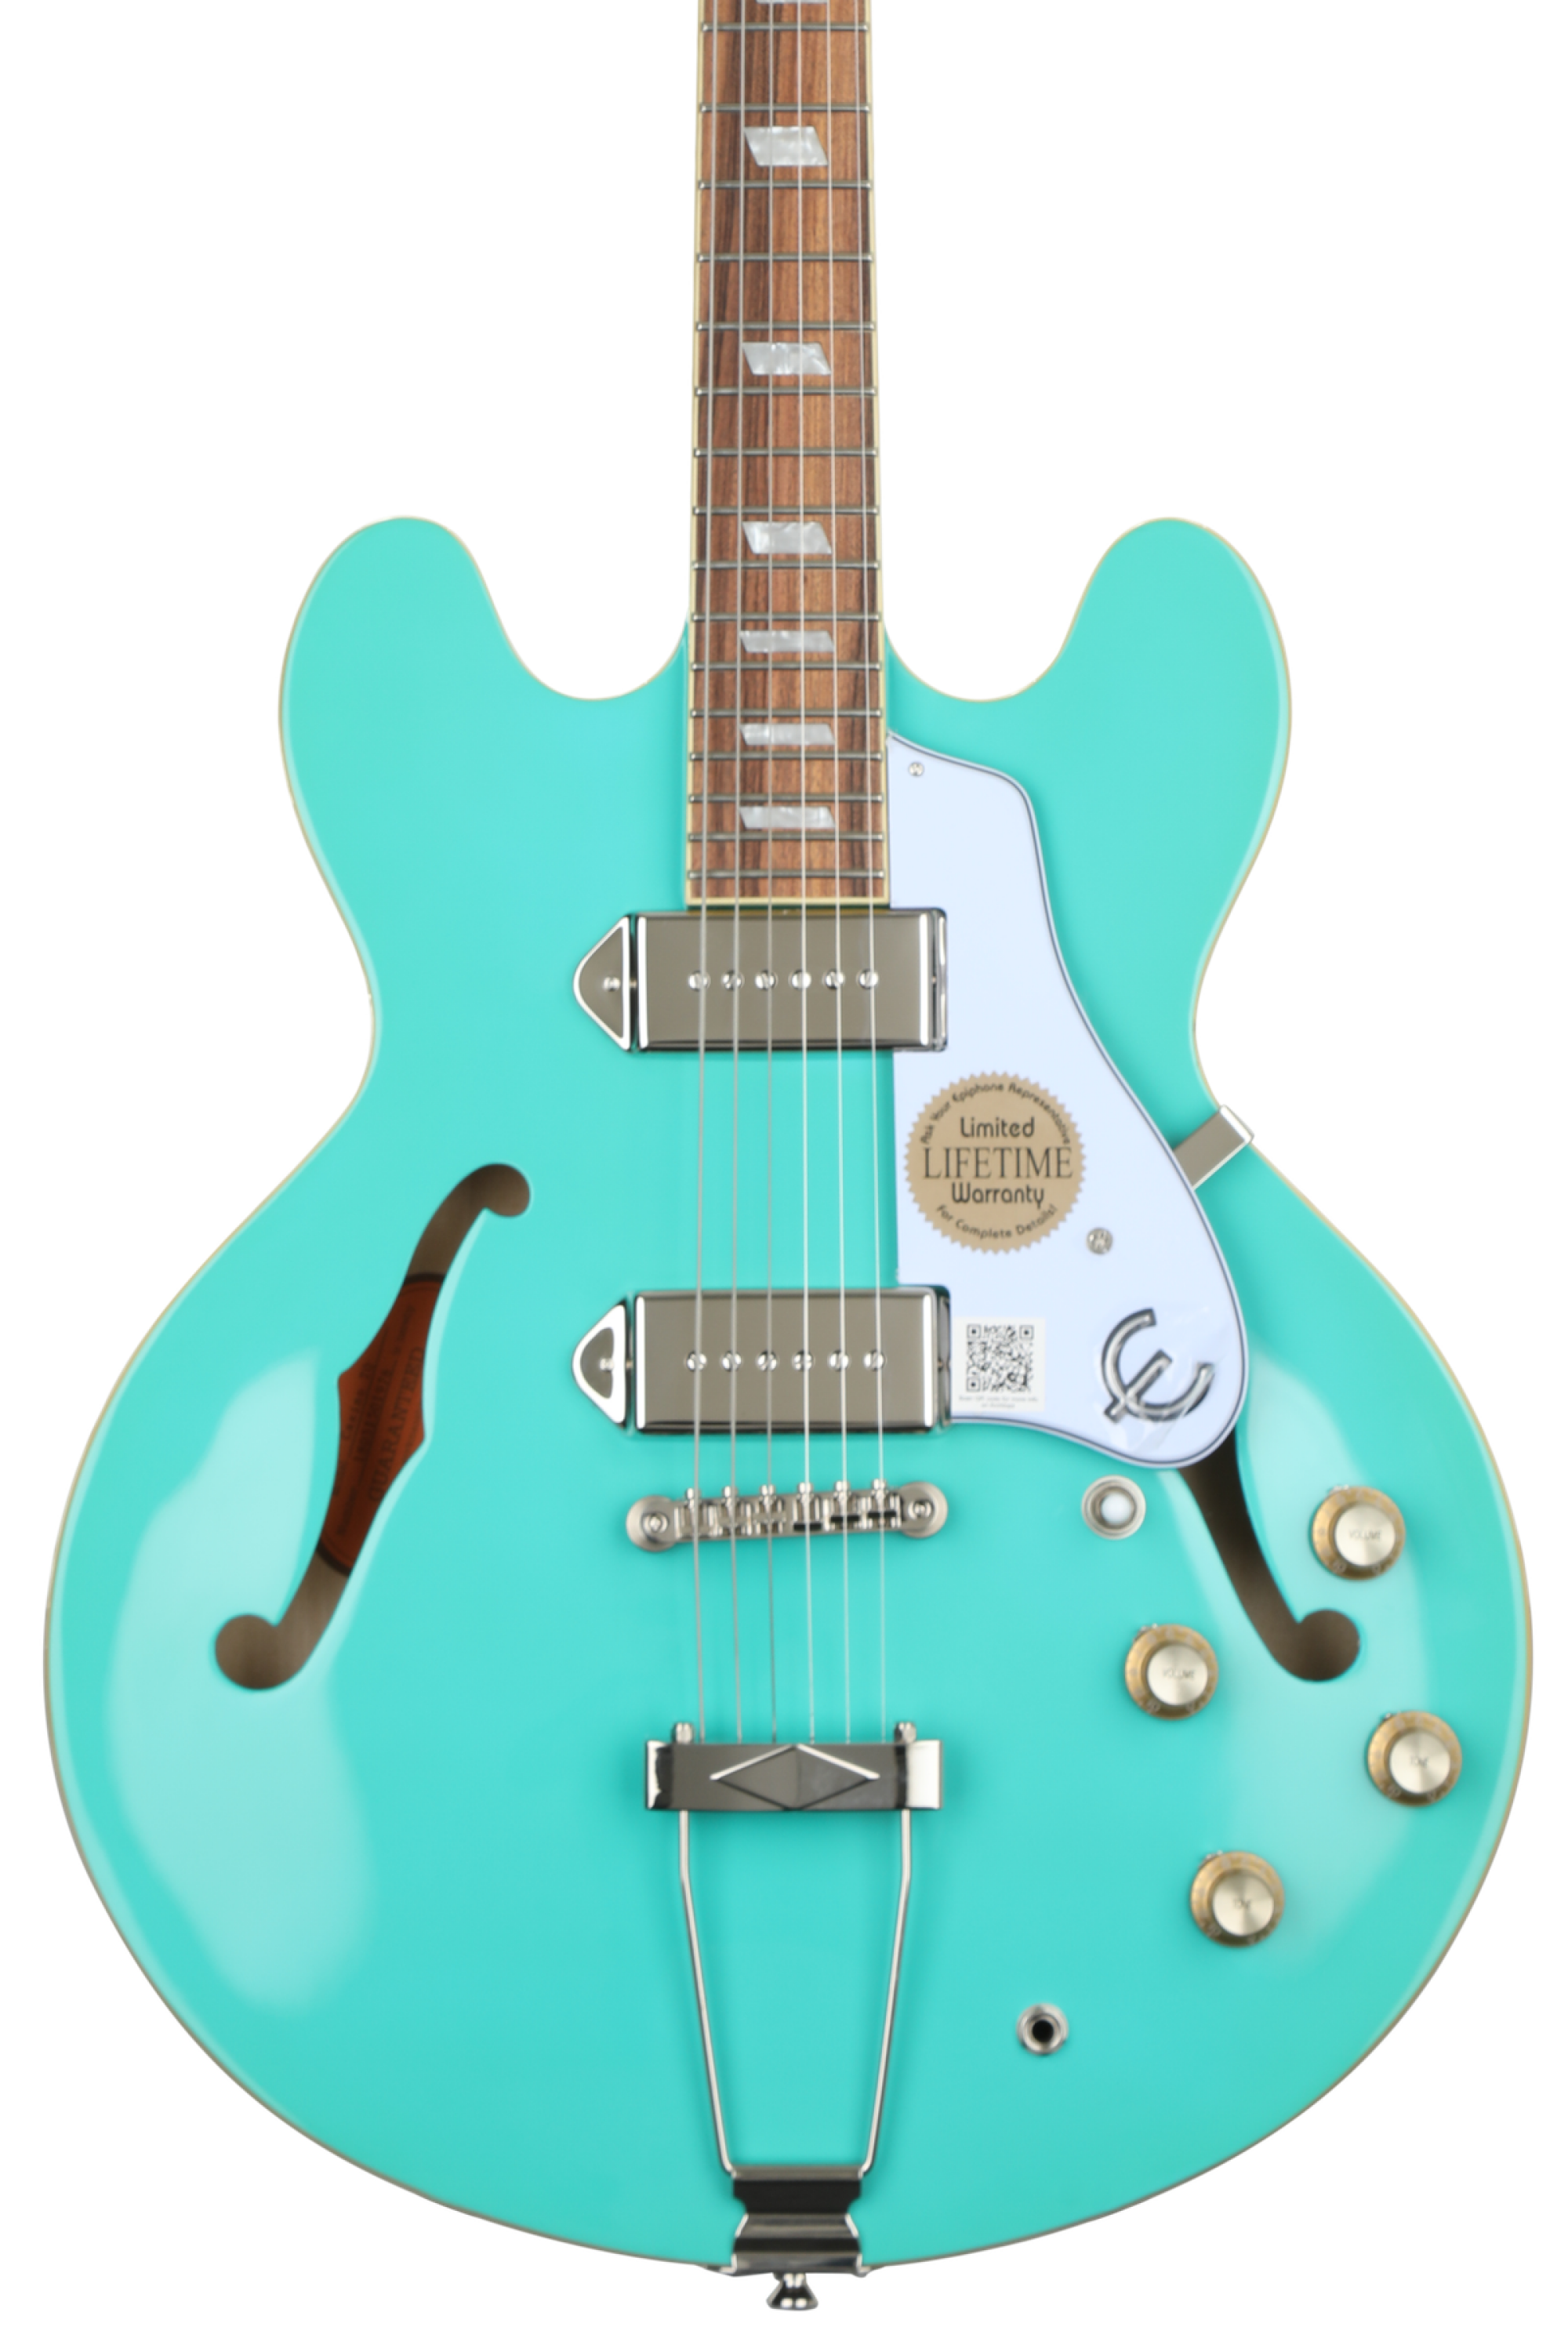 Epiphone Casino Archtop Hollowbody Electric Guitar - Turquoise | Sweetwater